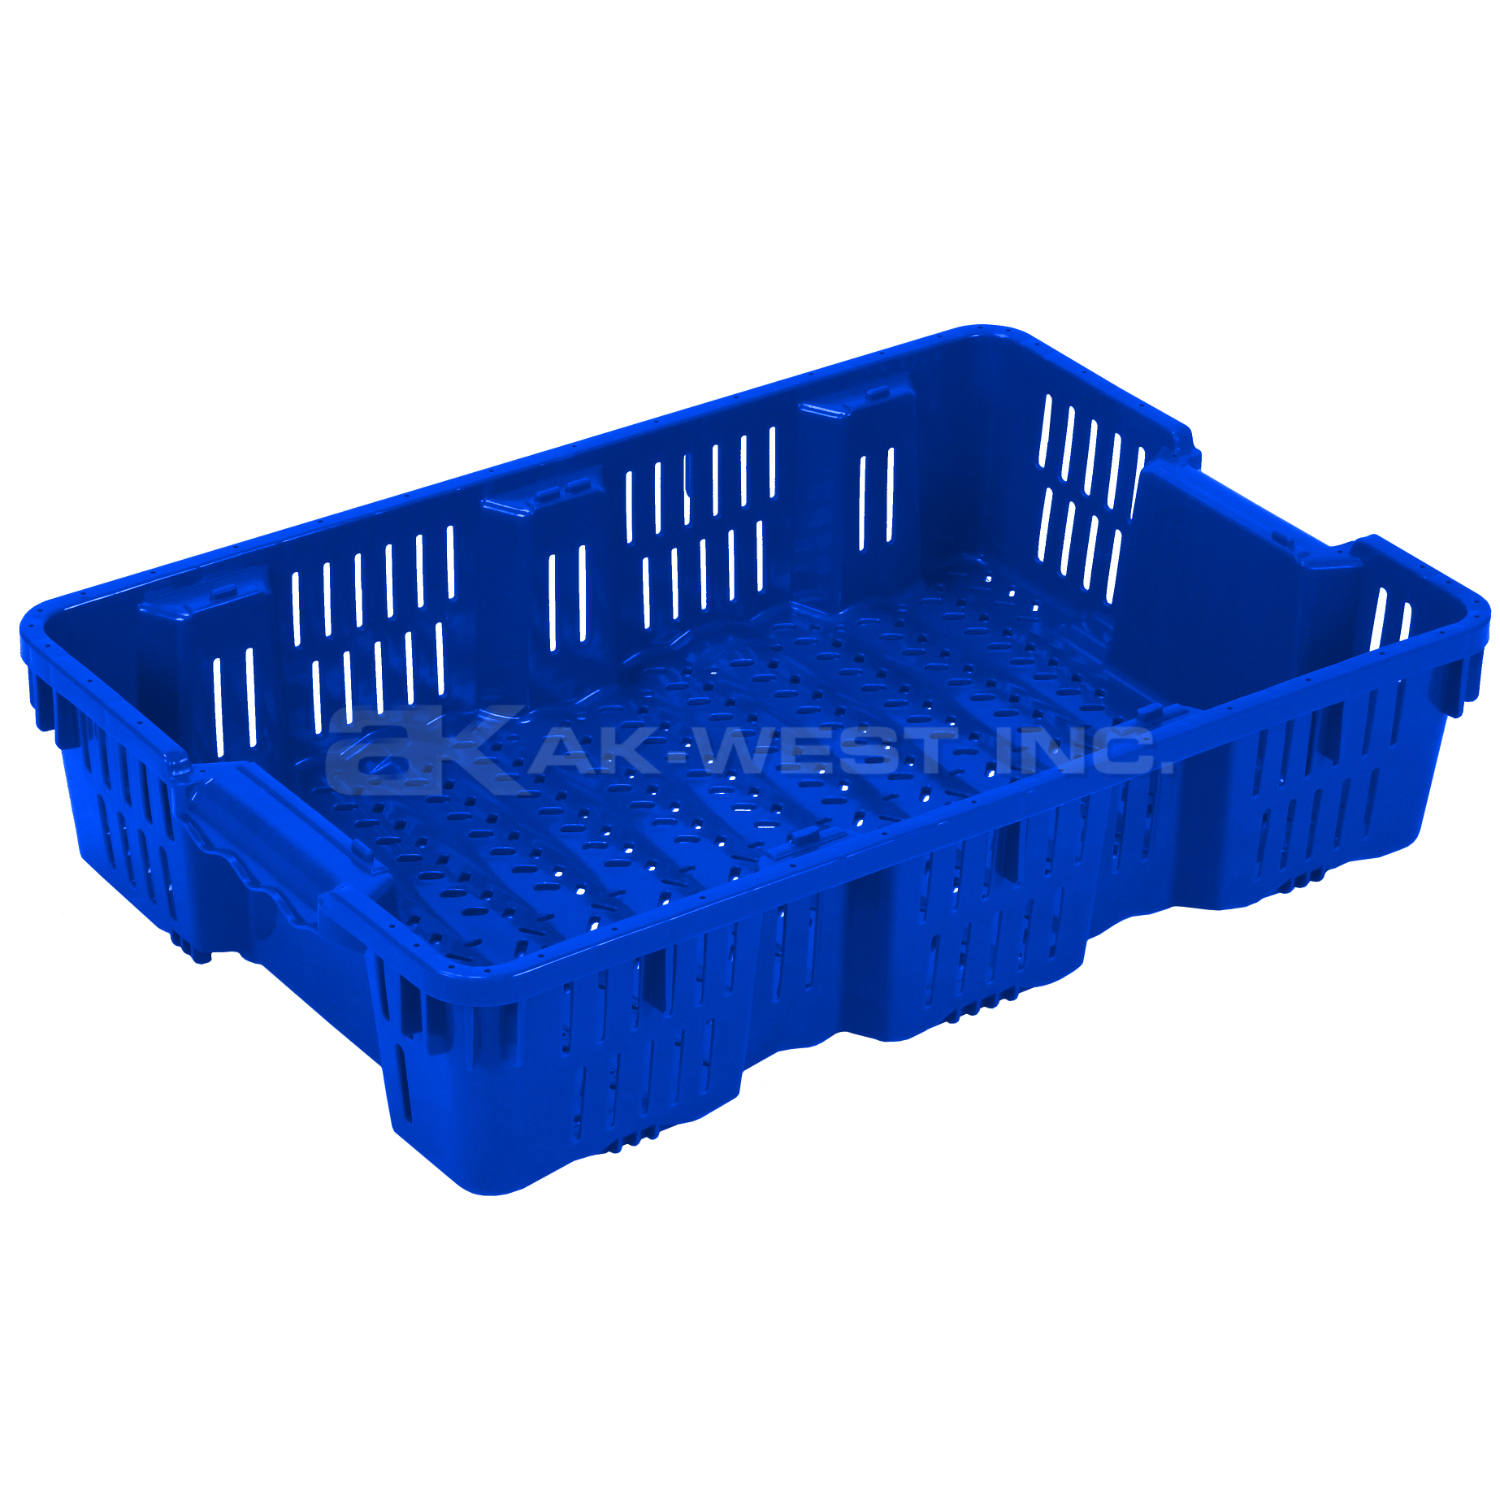 Blue, 24"L x 16"W x 5"H Wavy Stack and Nest Container w/ Vented Sides and Base